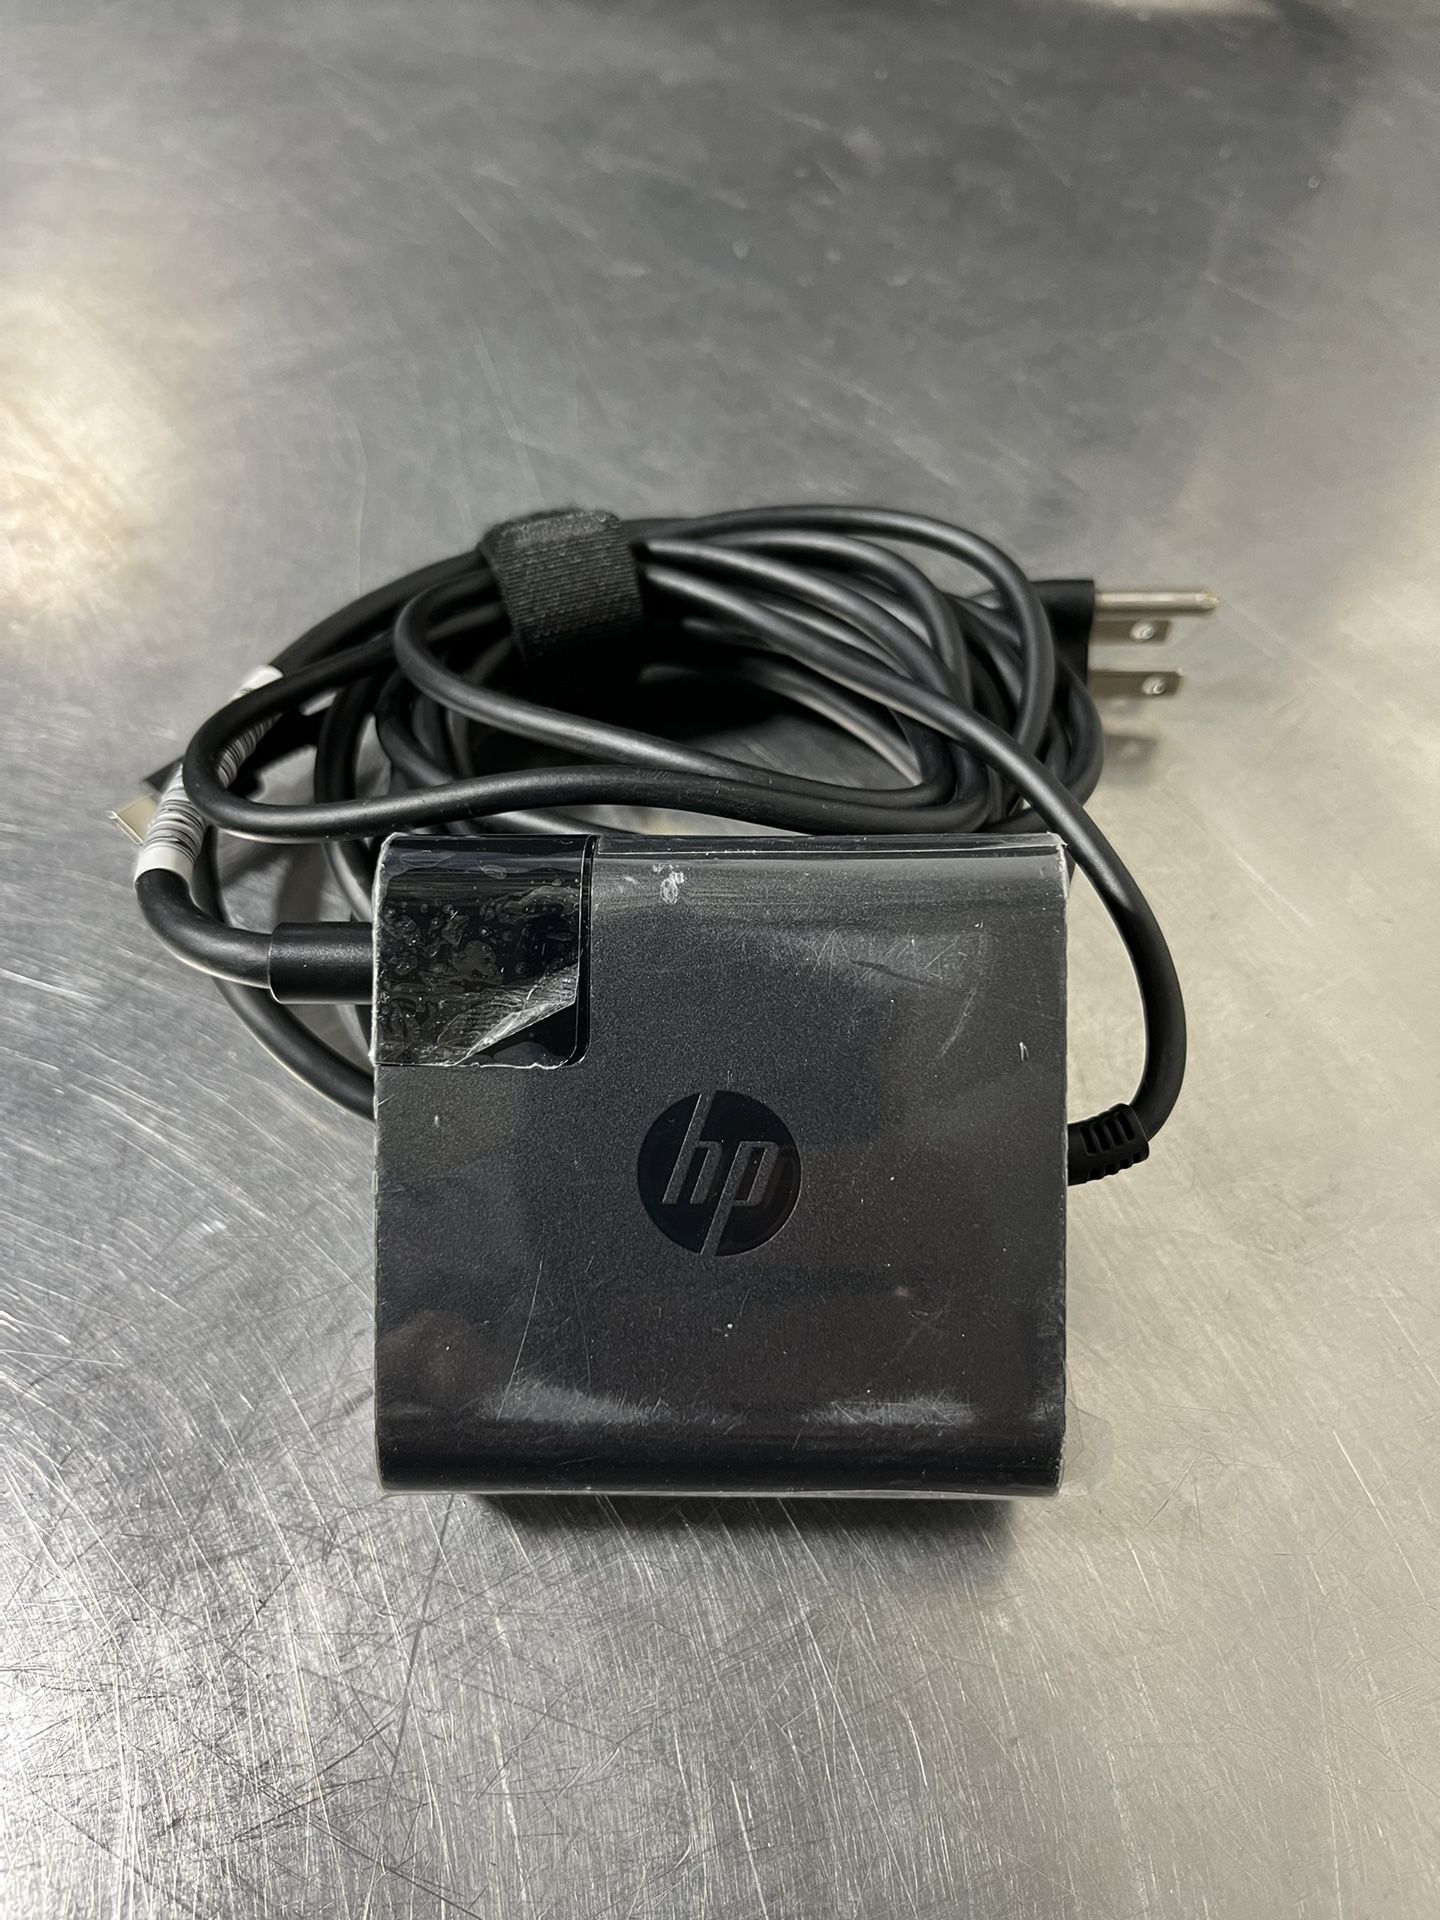 ac adapter Hp charger Usb-c type 65watts comparible with any hp laptop with usb-c charging port